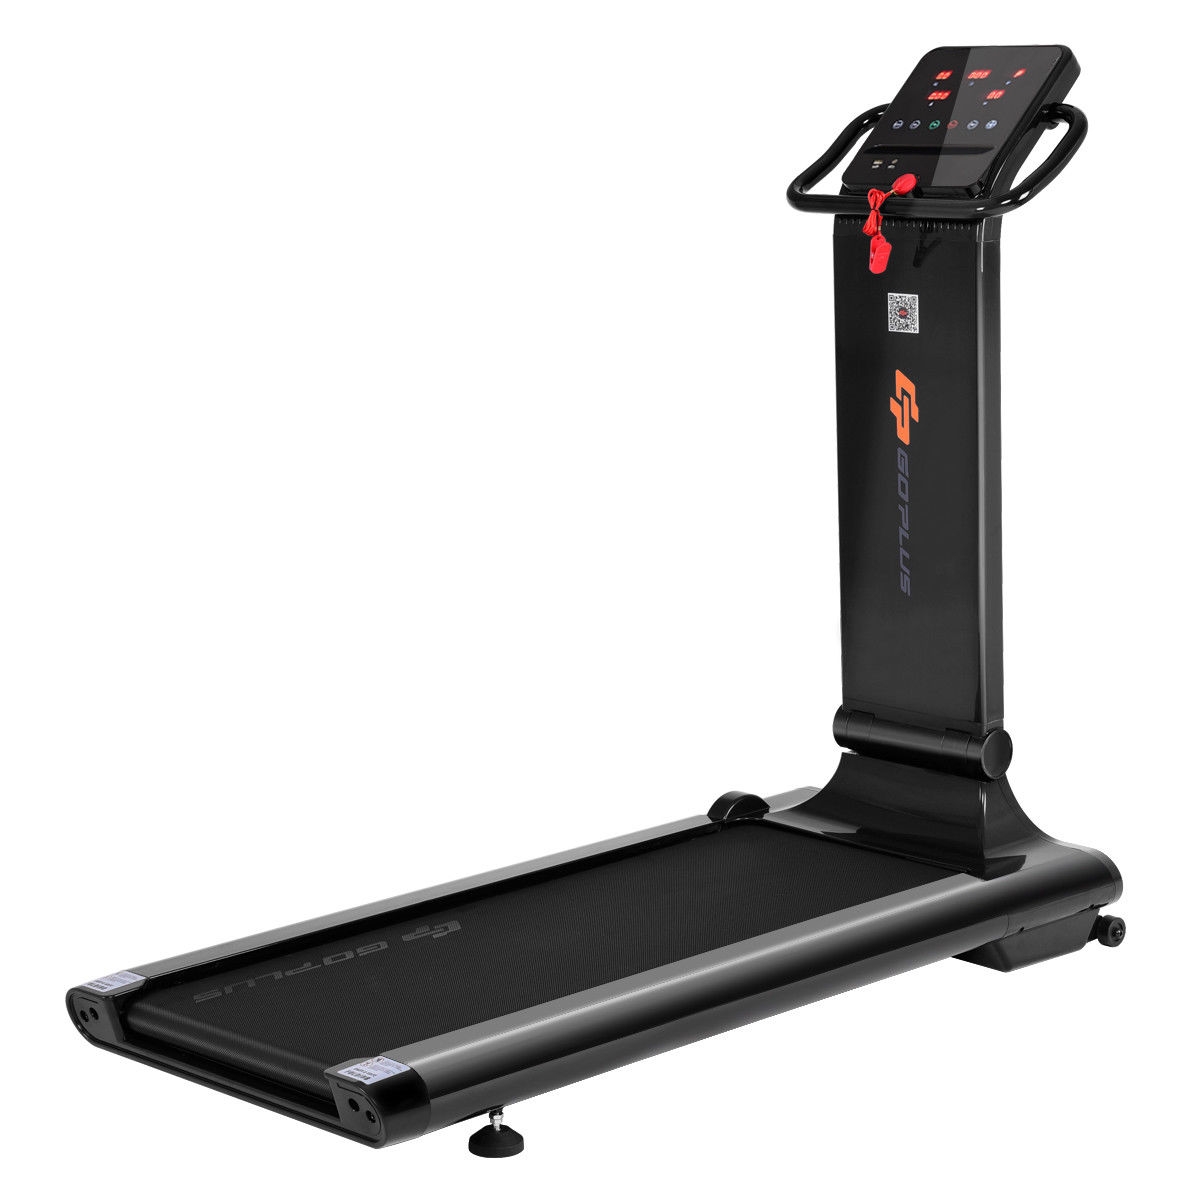 This high-quality, foldable and easily operated treadmill, let your home be your gymnasium. Safety clip will stop the treadmill as needed, thus you can avoid security concerns. This treadmill has 99 kinds of automatic systems and three different movement modes to choose for your comfortable sports experience indoors. Hi-Fi sound system will offer you relaxed atmosphere. What's more, you can connect treadmill to your phone through APP function and share your achievement with your friends. No time to go to the gym? Is the outdoor sports affected by the weather? Don't hesitate to take this running machine home! Brand new and high quality Free-of-installation APP function for connecting treadmill and your phone LCD window console display "Distance", "Calories", "Time" Multi-patterns: Full manual movement mode, automatic program movement mode and the countdown mode motion mode USB battery charge and Hi-Fi sound system 99 kinds of optional Automatic syste